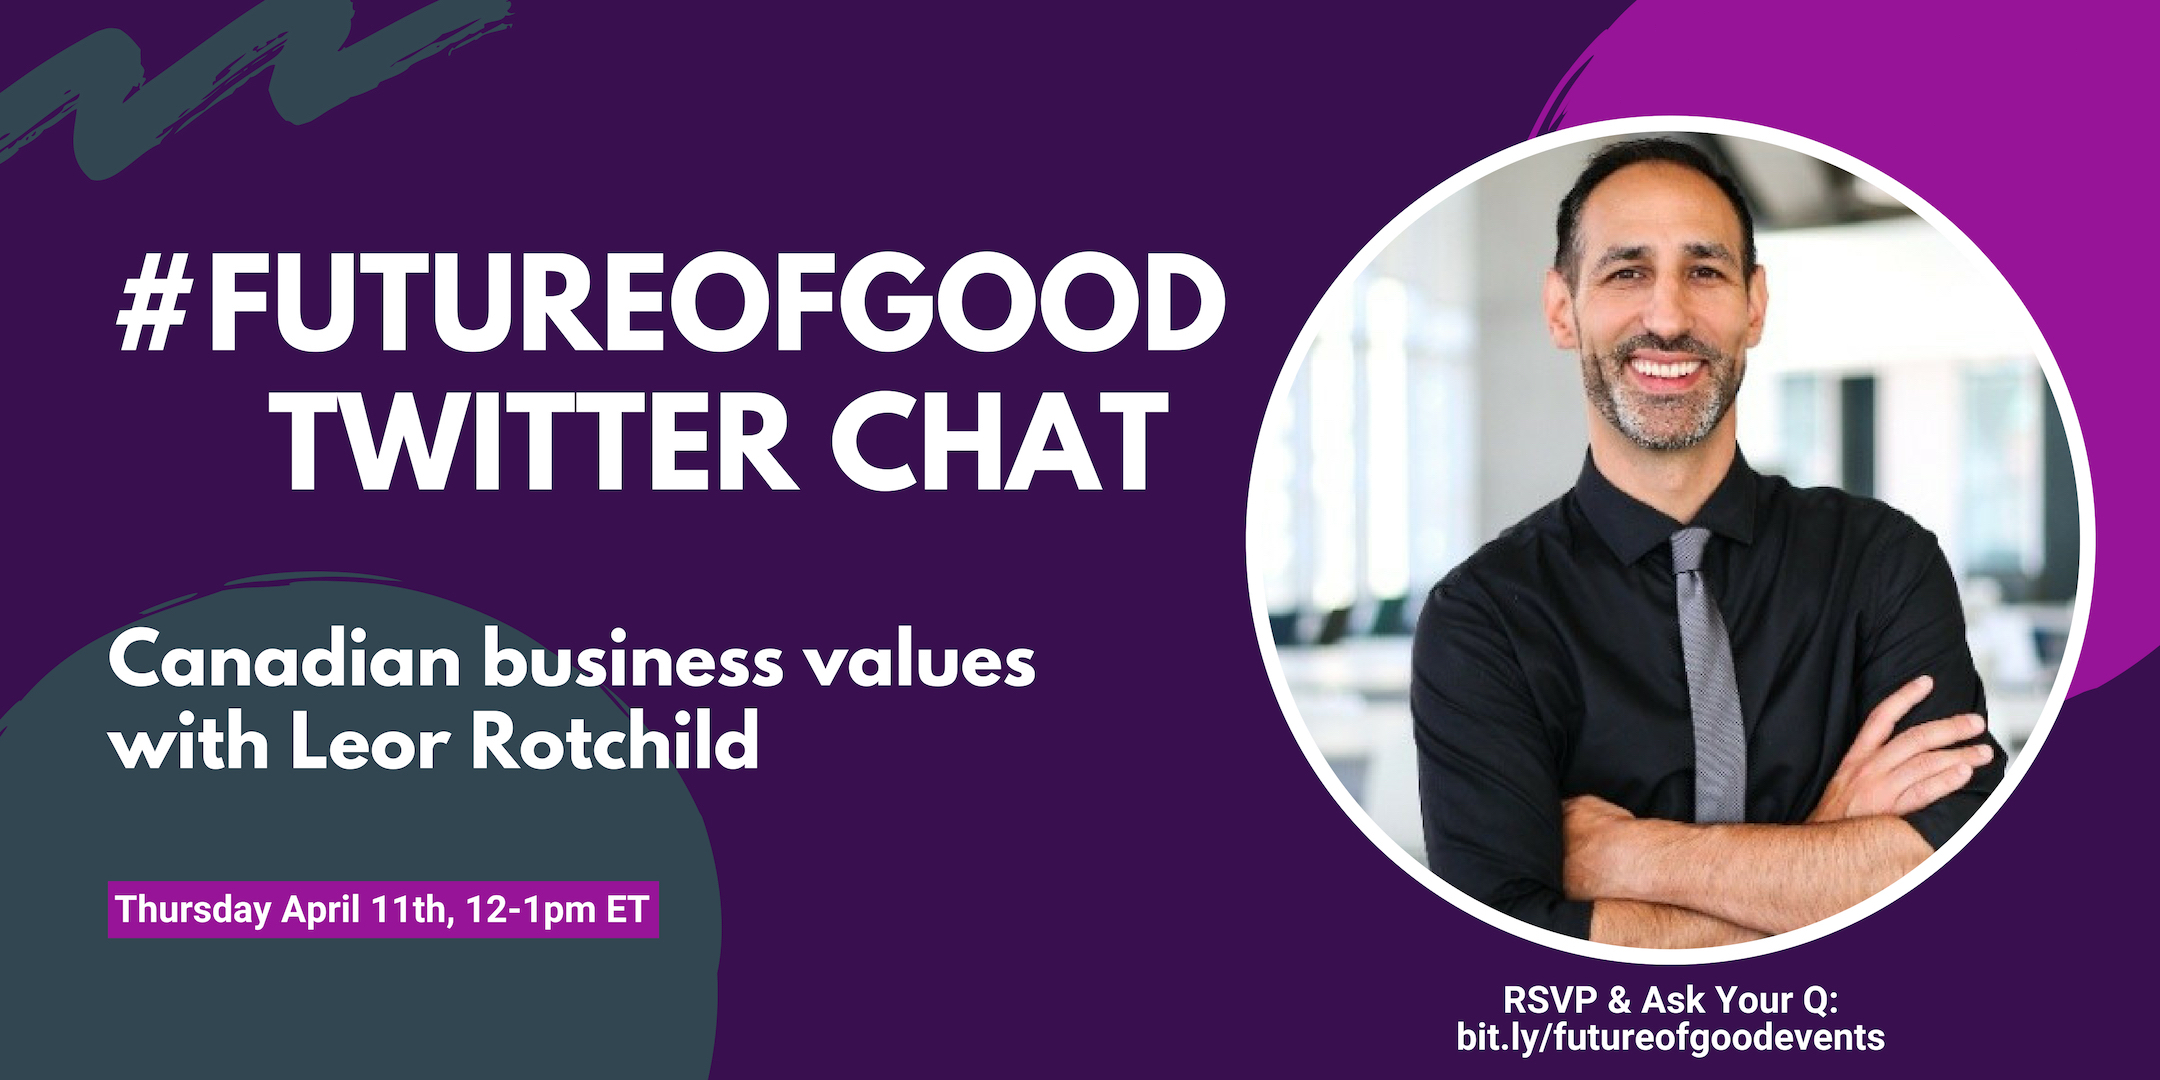 Twitter chat with Leor Rotchild on Future of Good